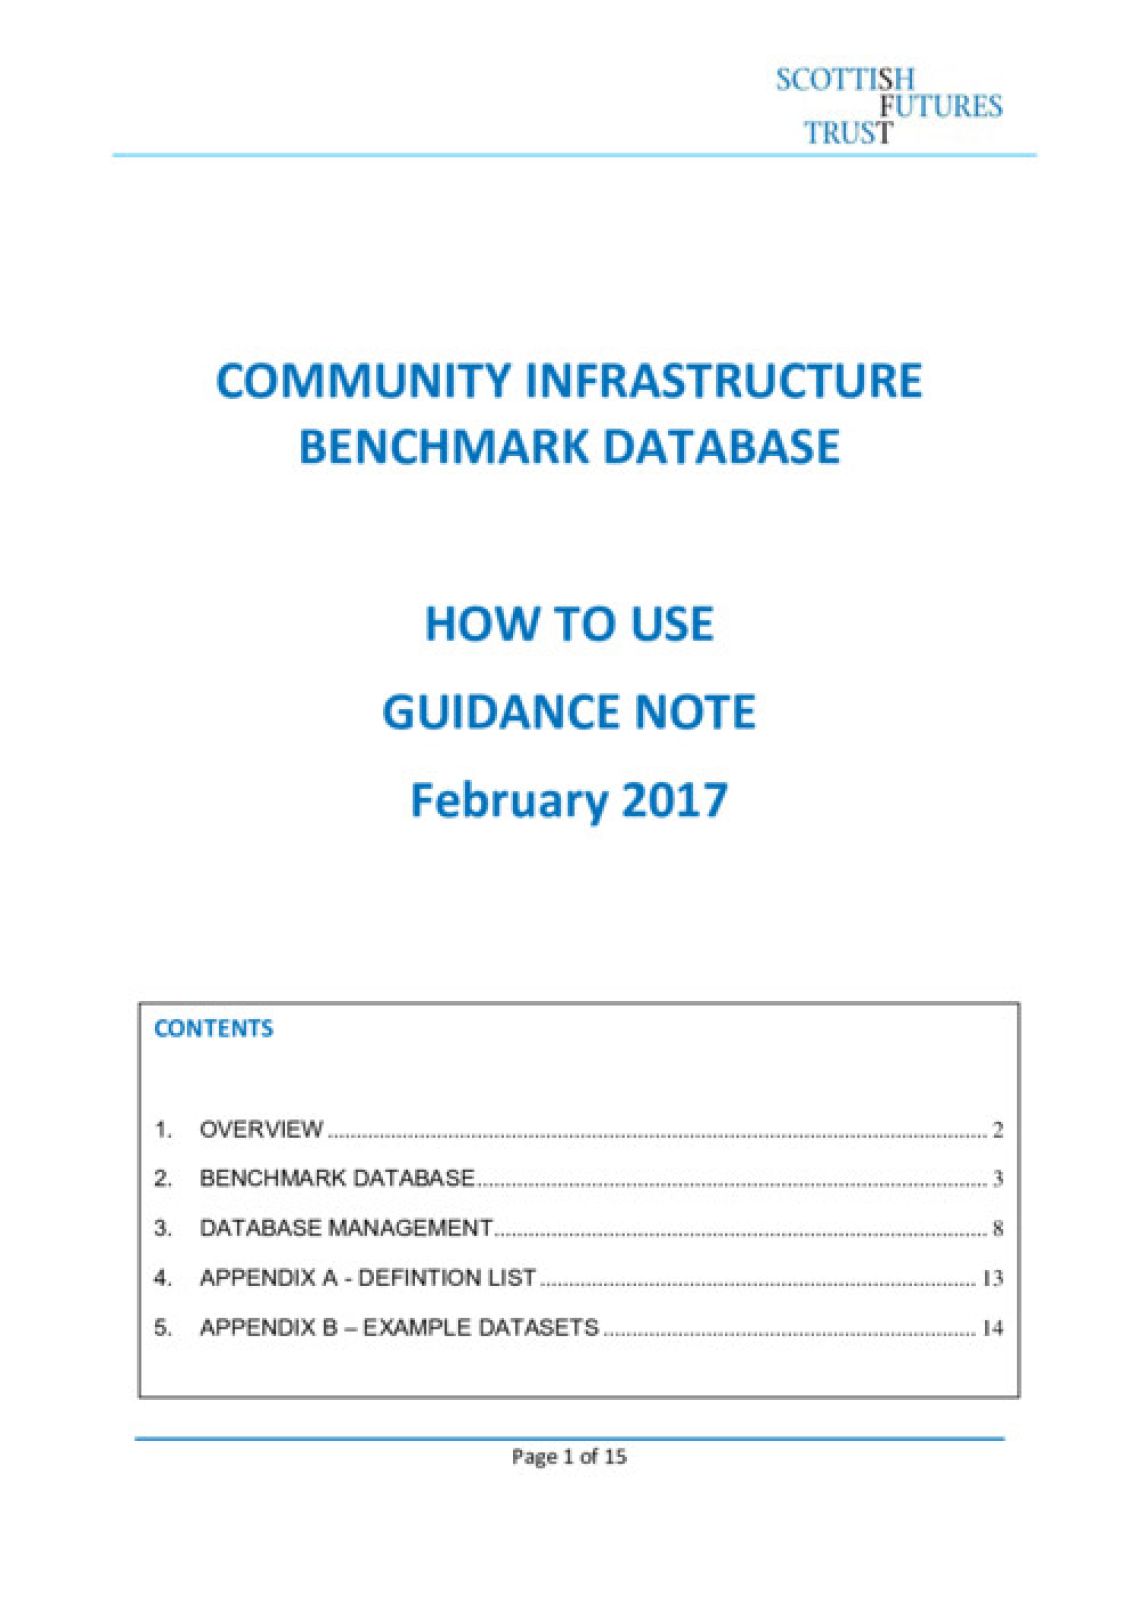 Guidance Note for Community Infrastructure Benchmark Database cover